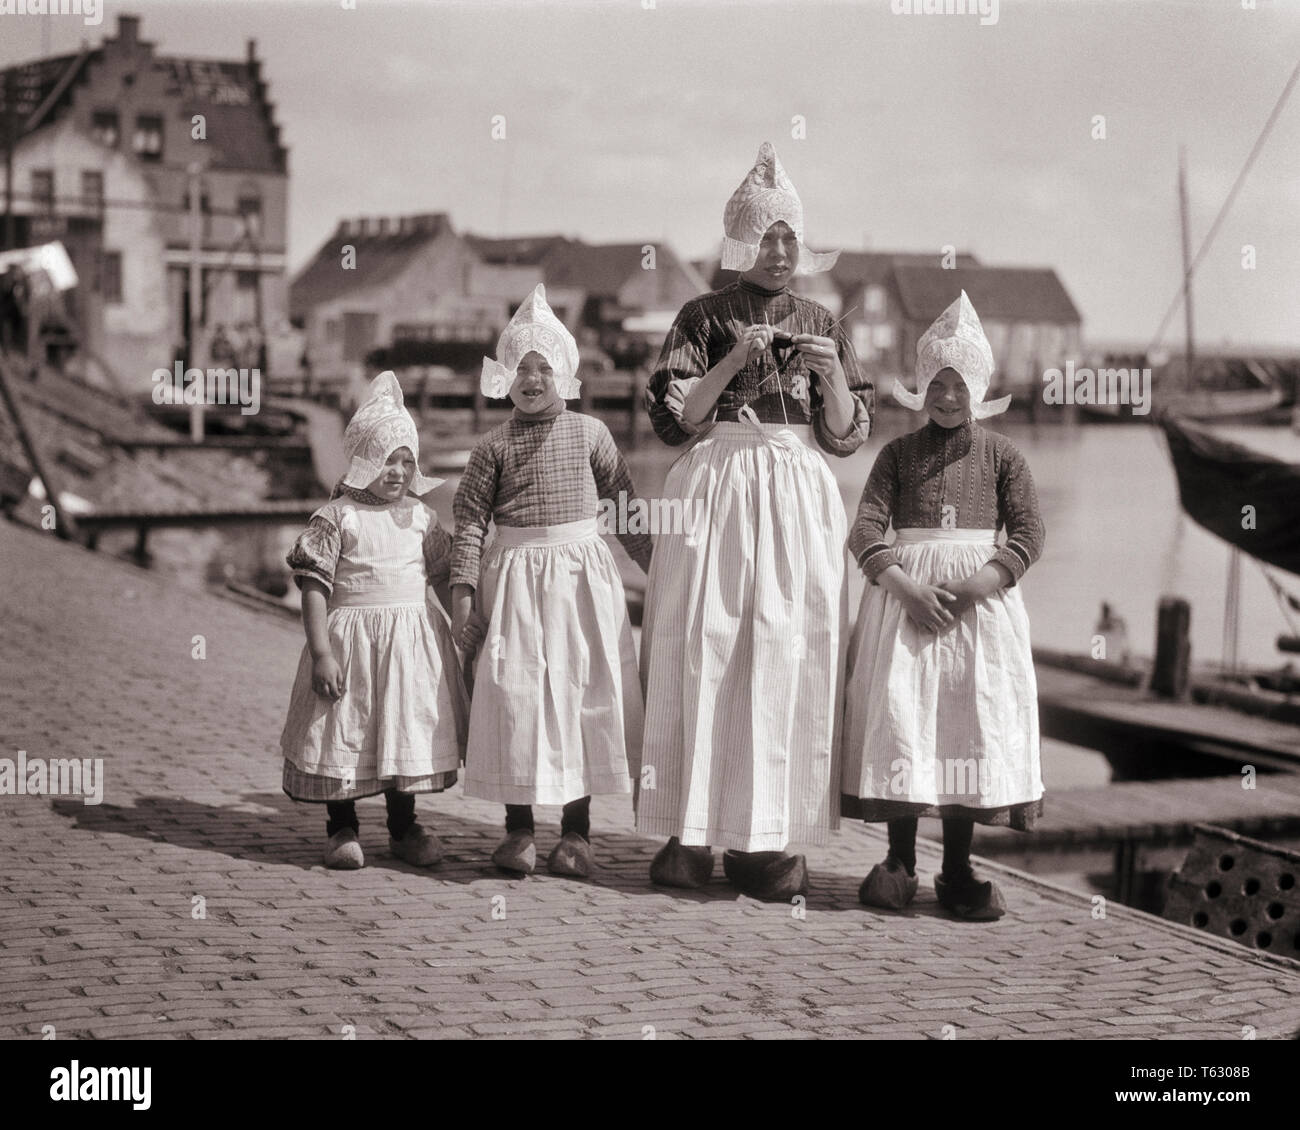 1920s MOTHER AND THREE DAUGHTERS TYPICAL DUTCH COSTUMES LOOKING AT CAMERA  WOODEN SHOES APRONS LACE CAPS VOLENDAM HARBOR HOLLAND - r3730 HAR001 HARS  NOSTALGIA OLD FASHION SISTER 1 JUVENILE STYLE LIFESTYLE HISTORY